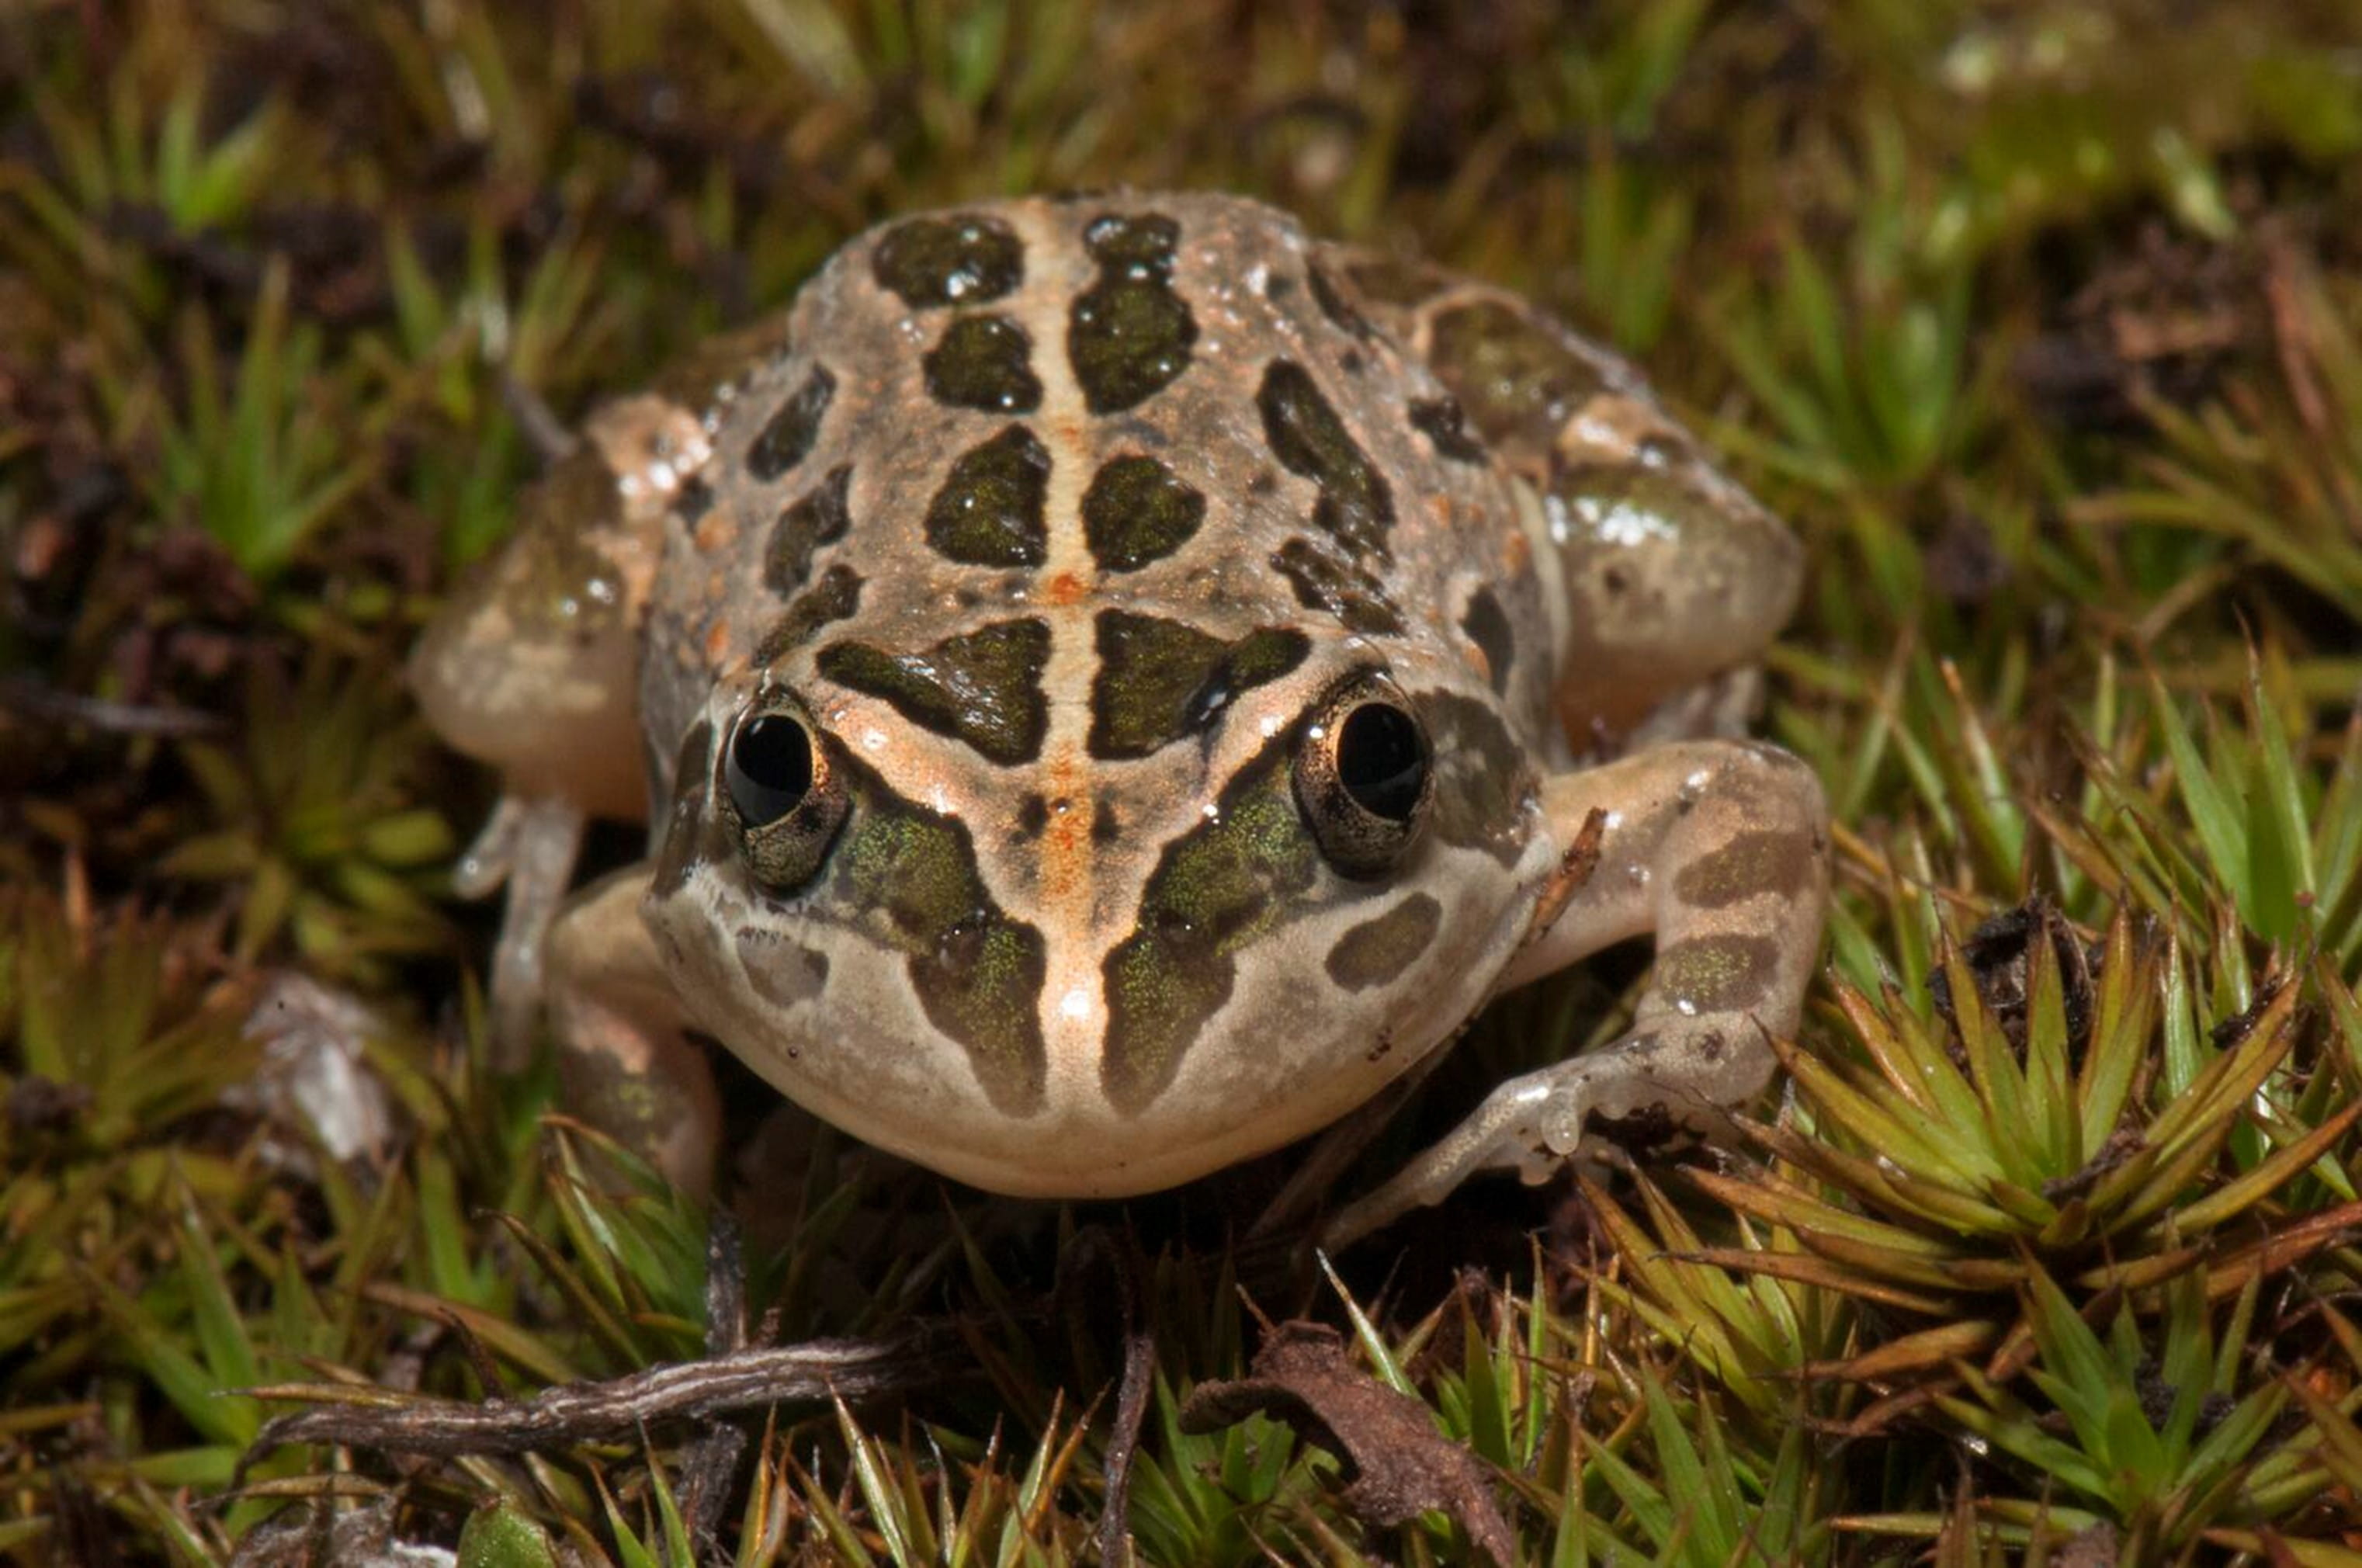 A spotty frog sits atop of small fronds of green vegetation.